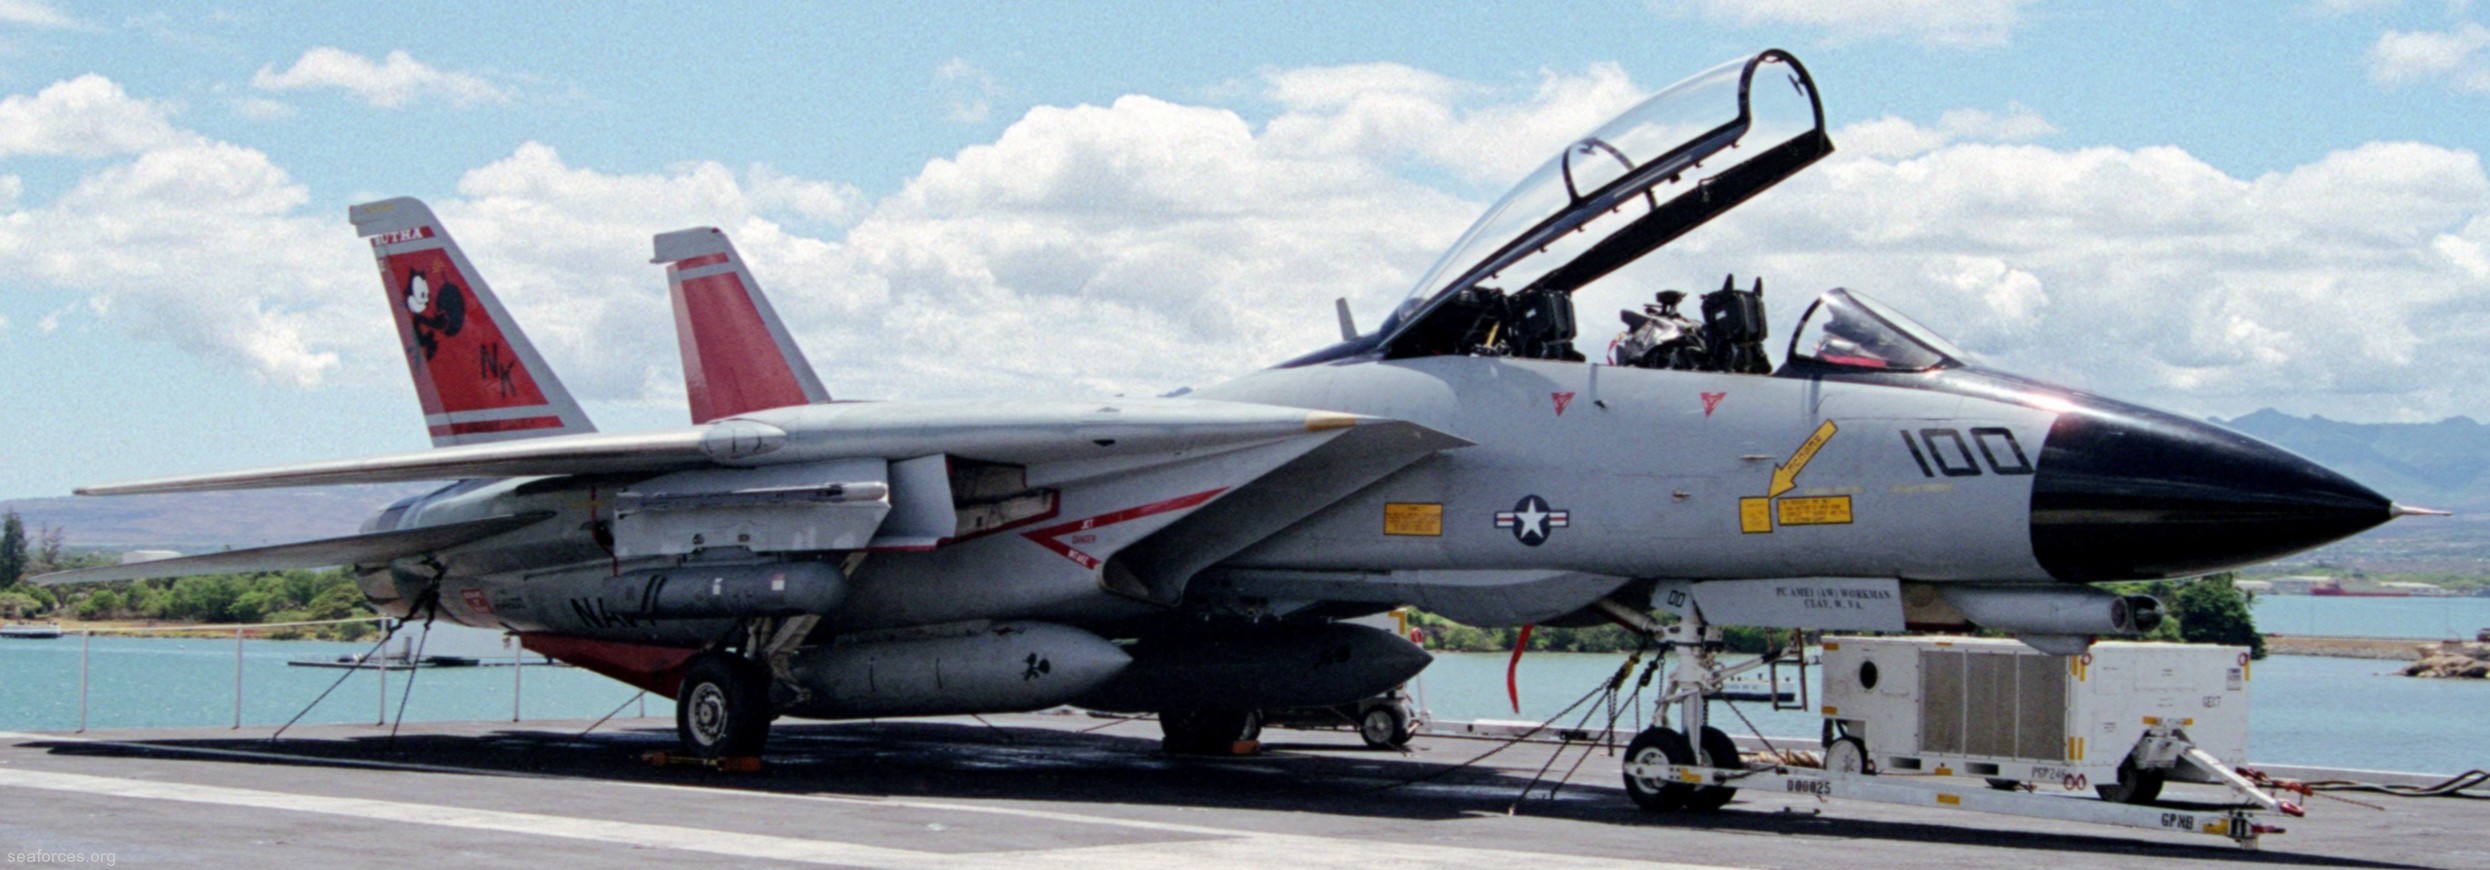 vf-31 tomcatters fighter squadron navy f-14d tomcat cvw-14 uss abraham lincoln cvn-72 117